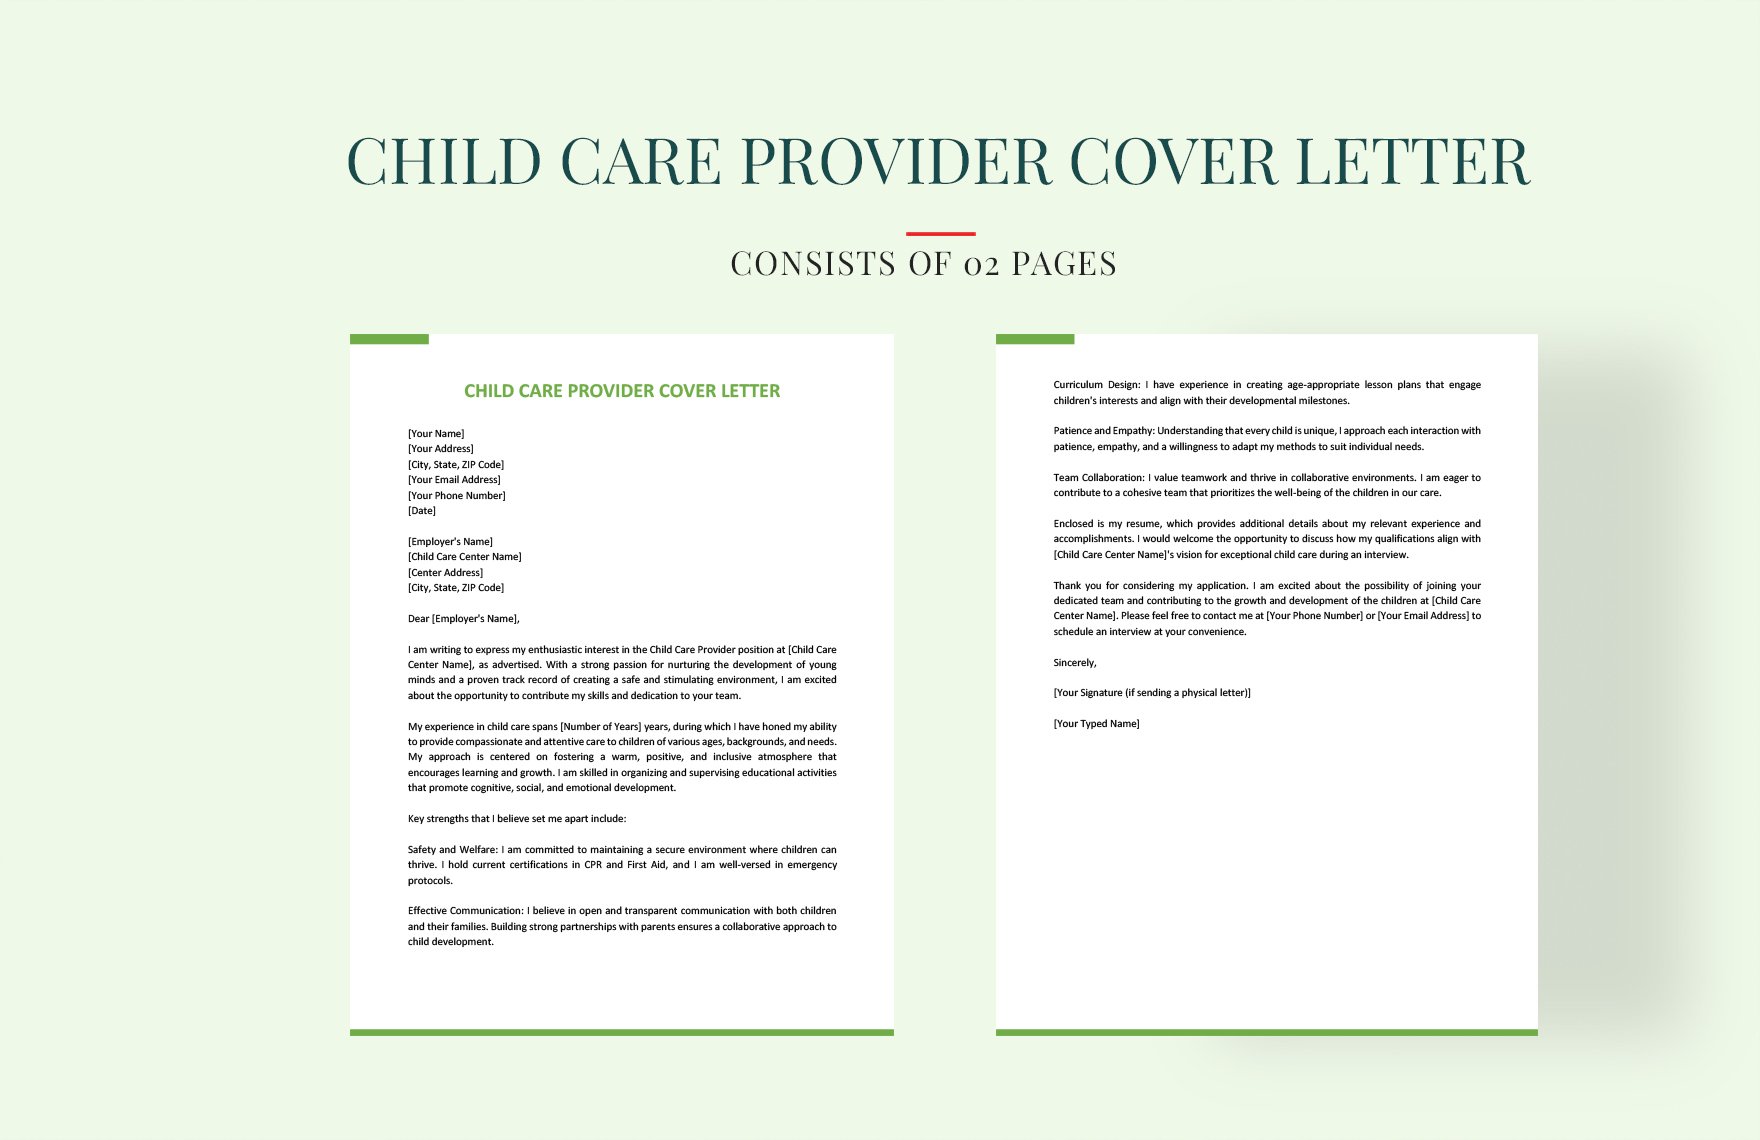 Child Care Provider Cover Letter in Word, Google Docs, PDF